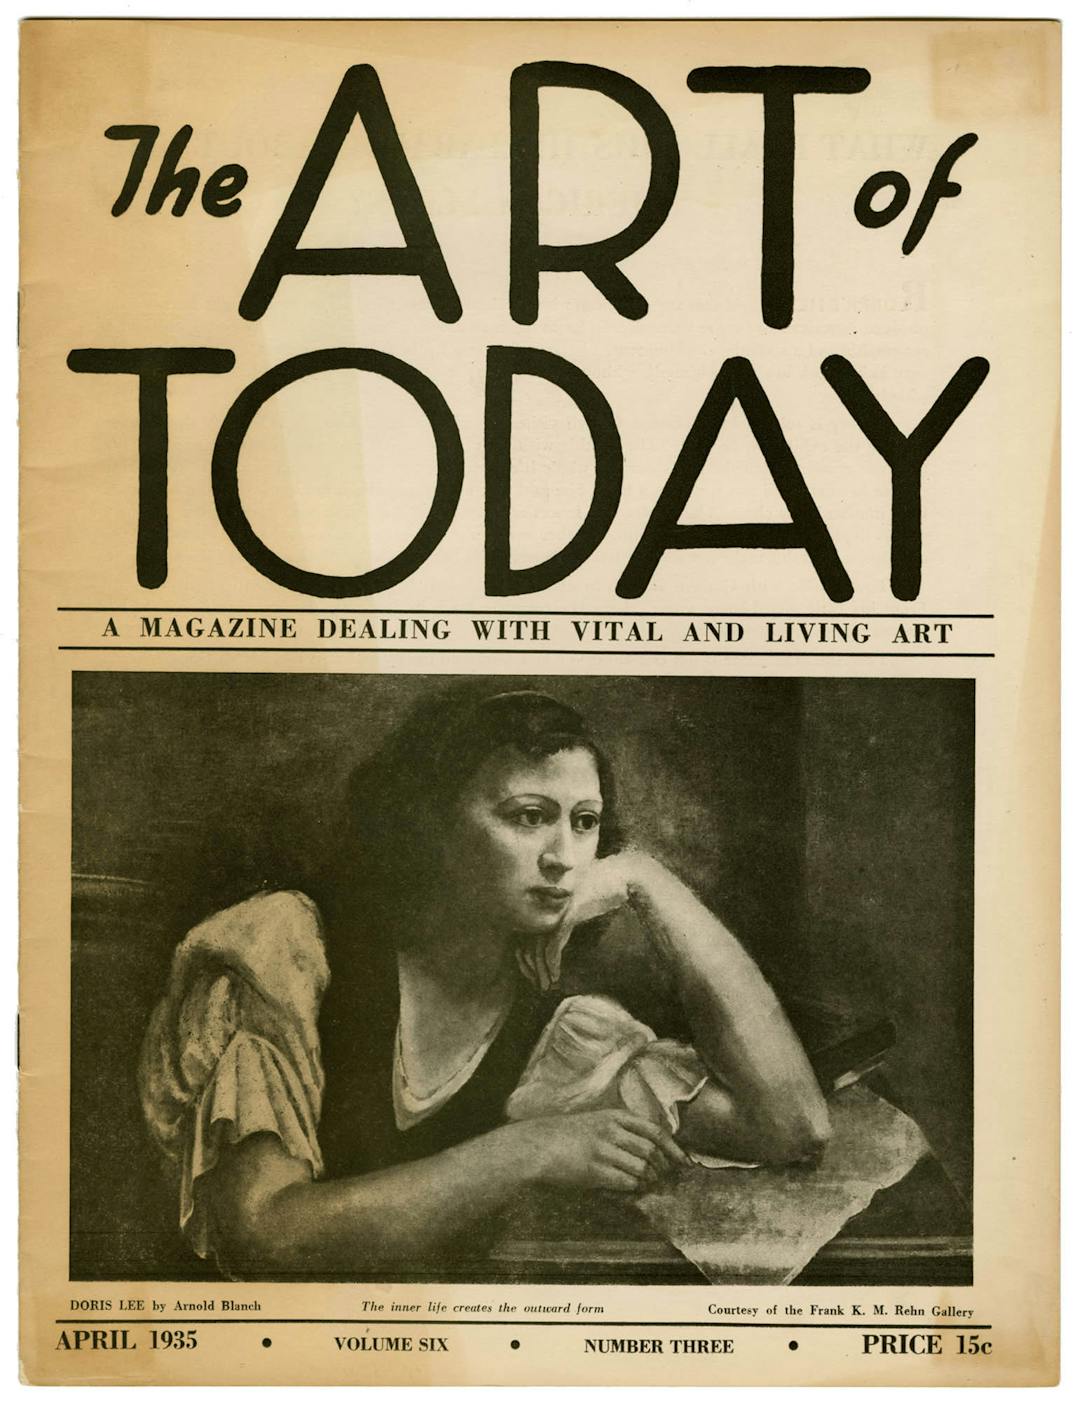 The Art of Today, Vol 6, no. 3, April 1935 – The Richard Pousette-Dart Foundation